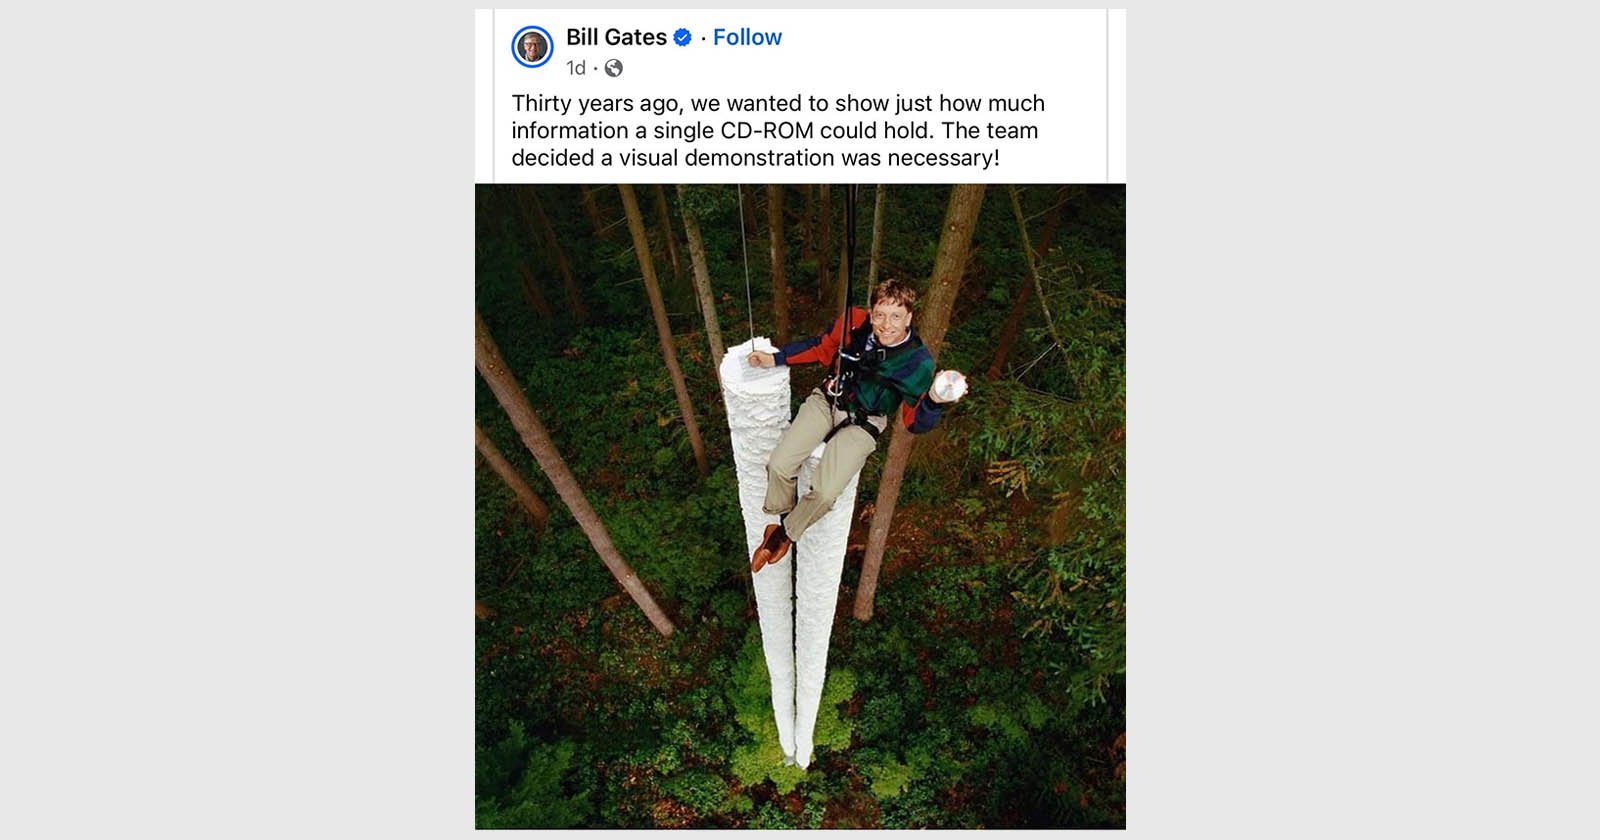  bill gates used photo without permission then 